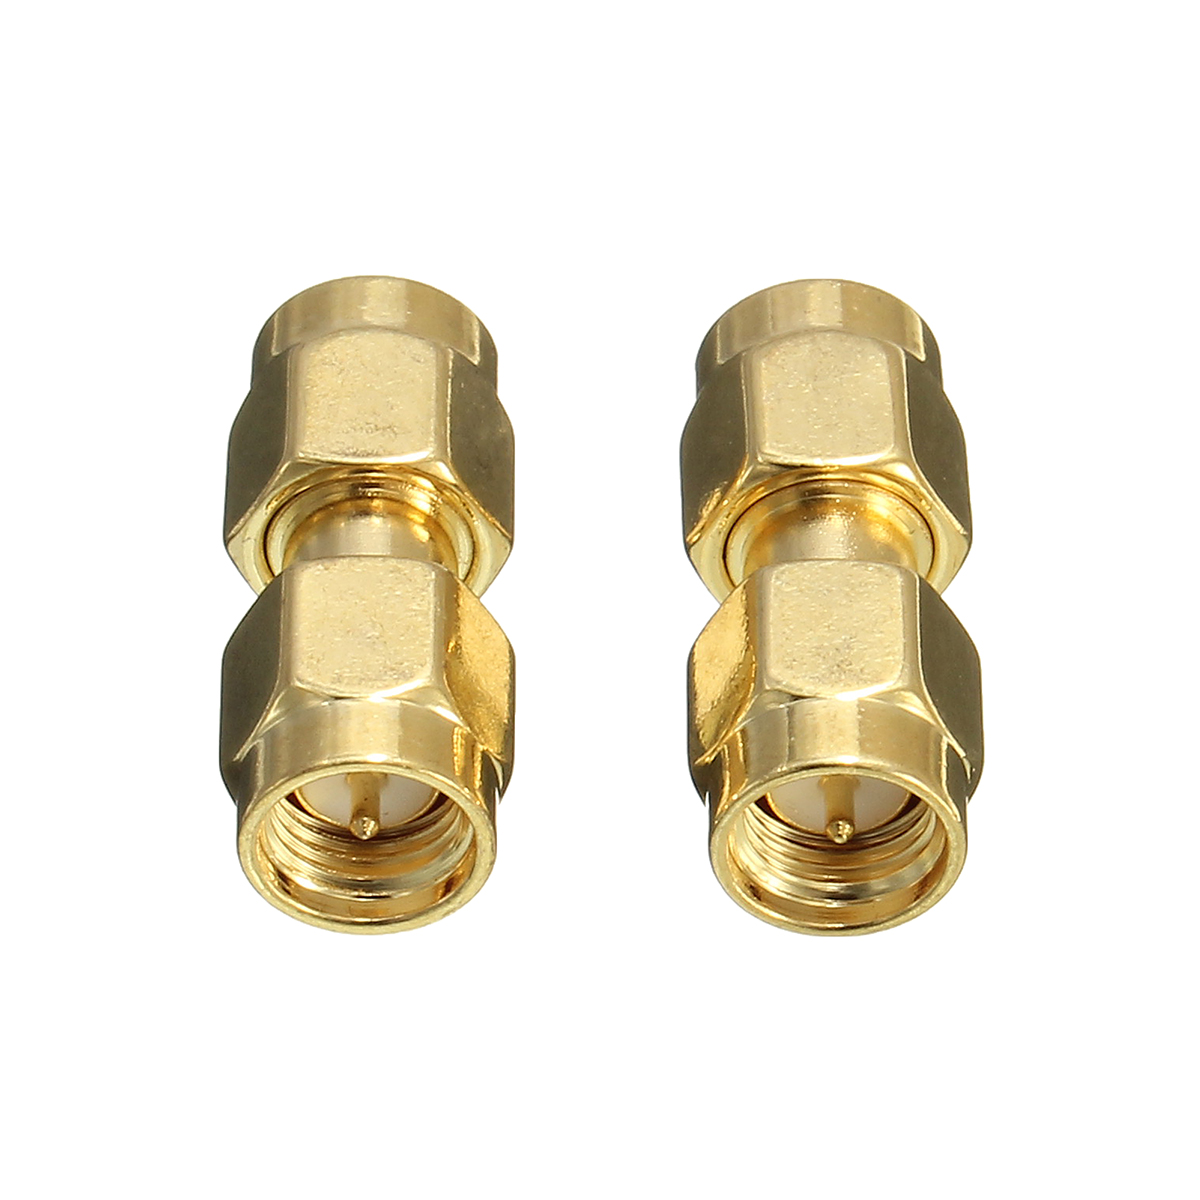 Excellwayreg-CA01-2Pcs-Copper-SMA-Male-To-SMA-Male-Plug-RF-Coaxial-Adapter-Connector-1073343-6